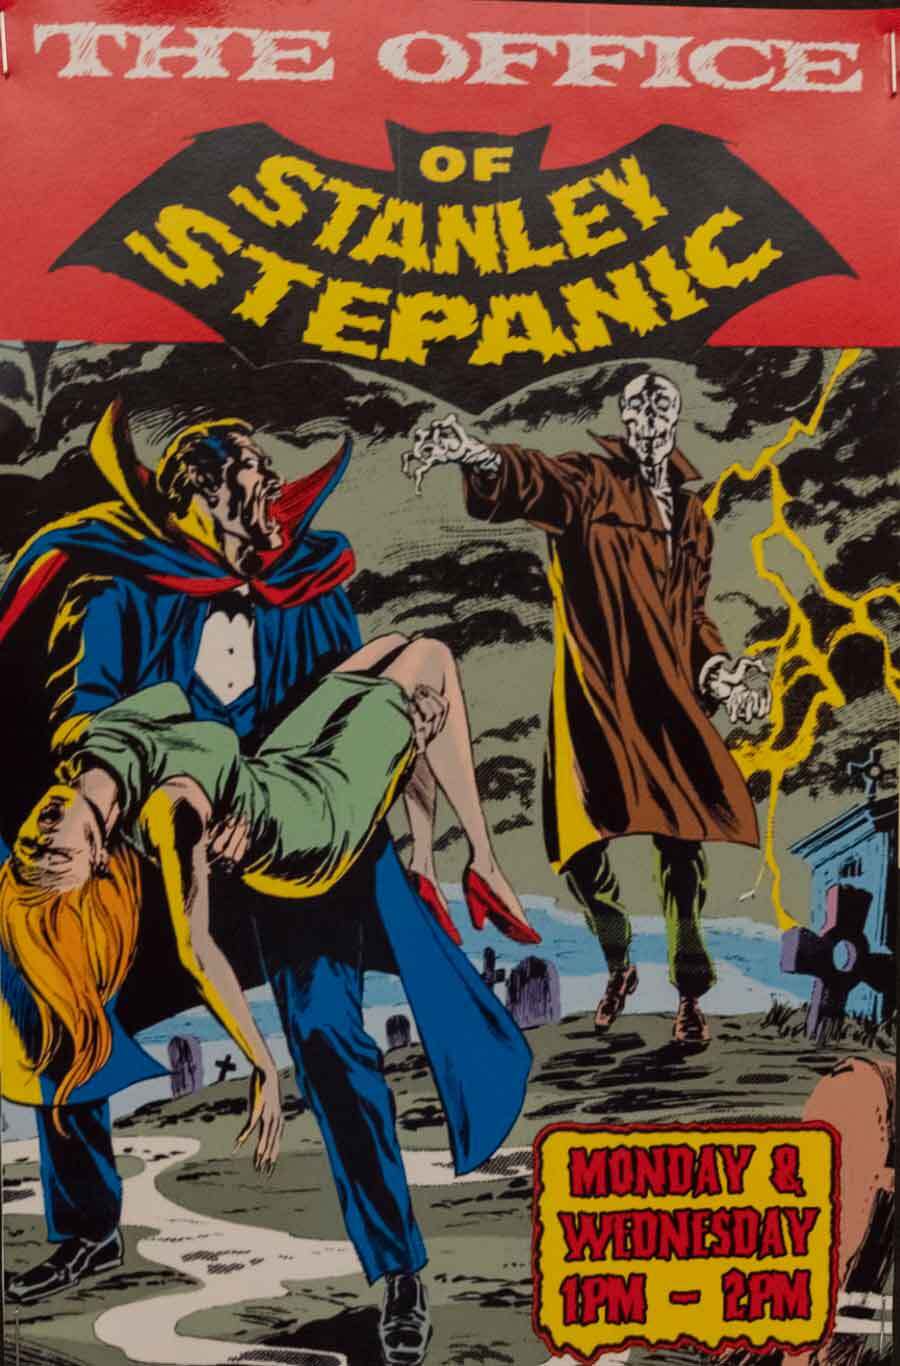 Stanely Stpanic's office hours sign looks like the cover of an old Dracula comic book